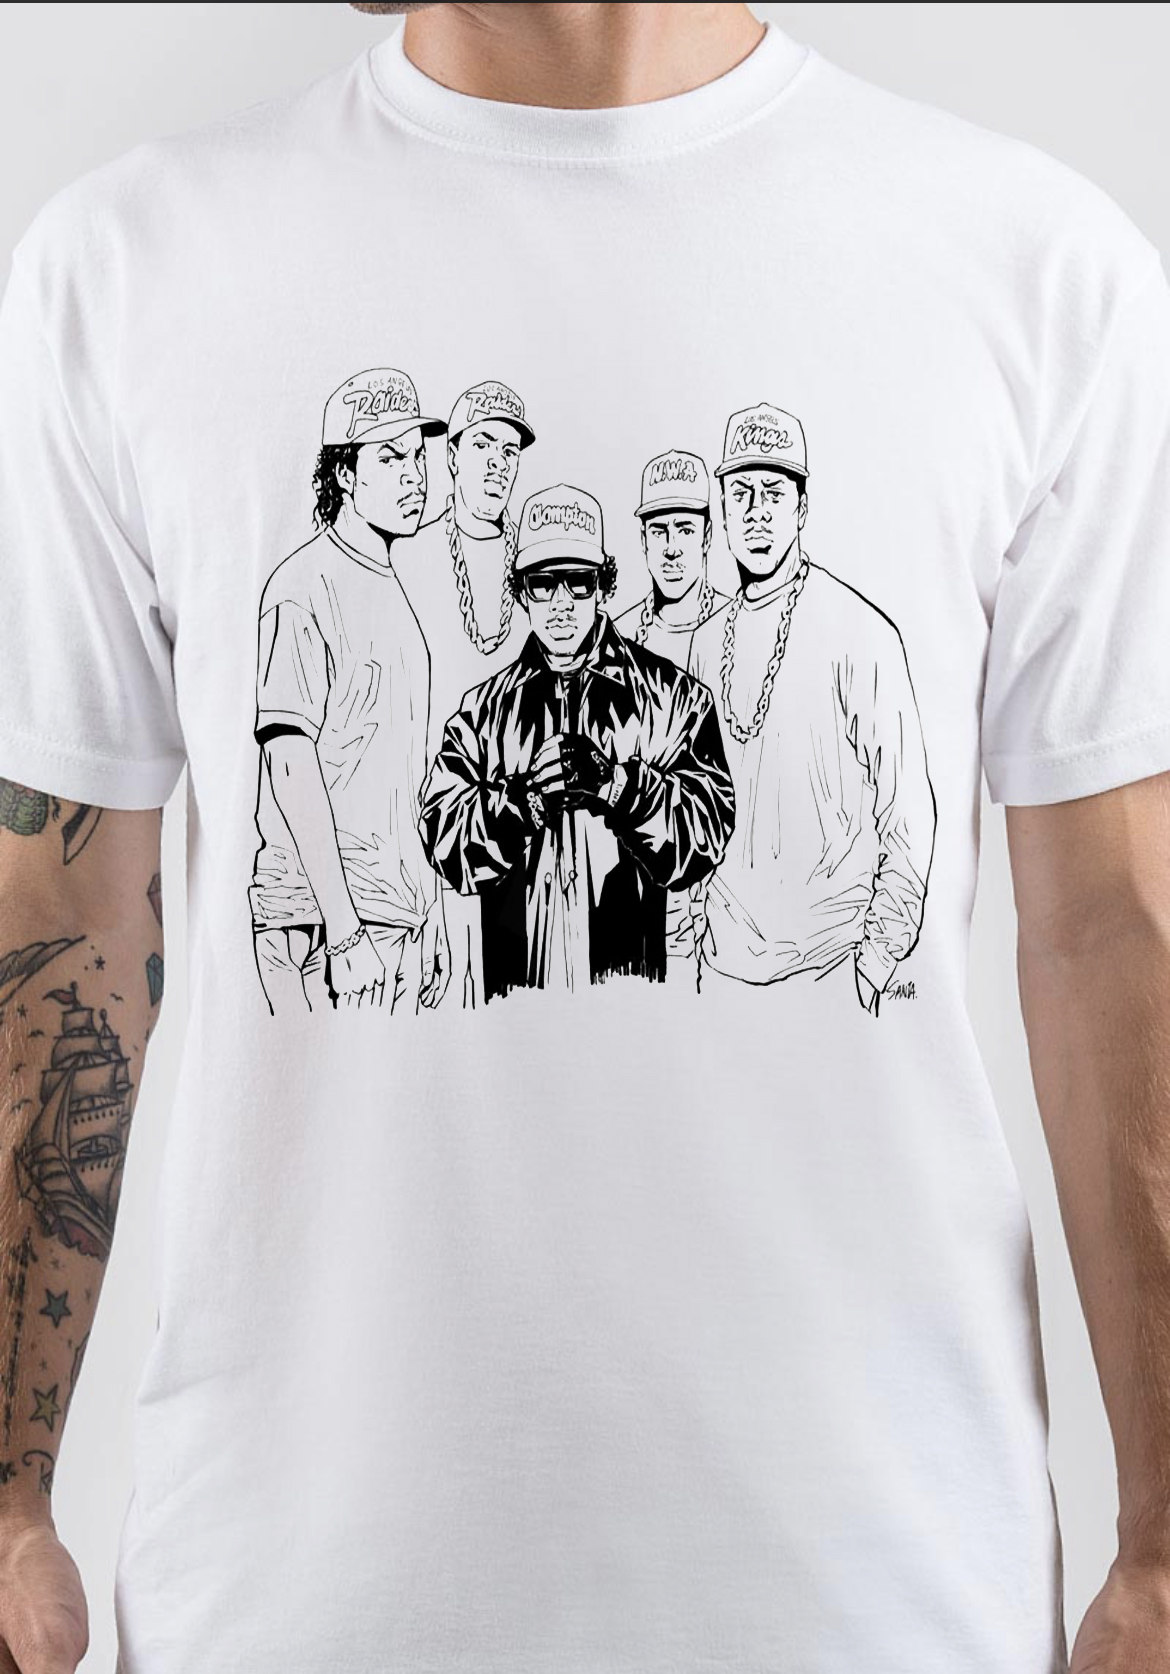 Straight Outta Compton T-Shirt And Merchandise